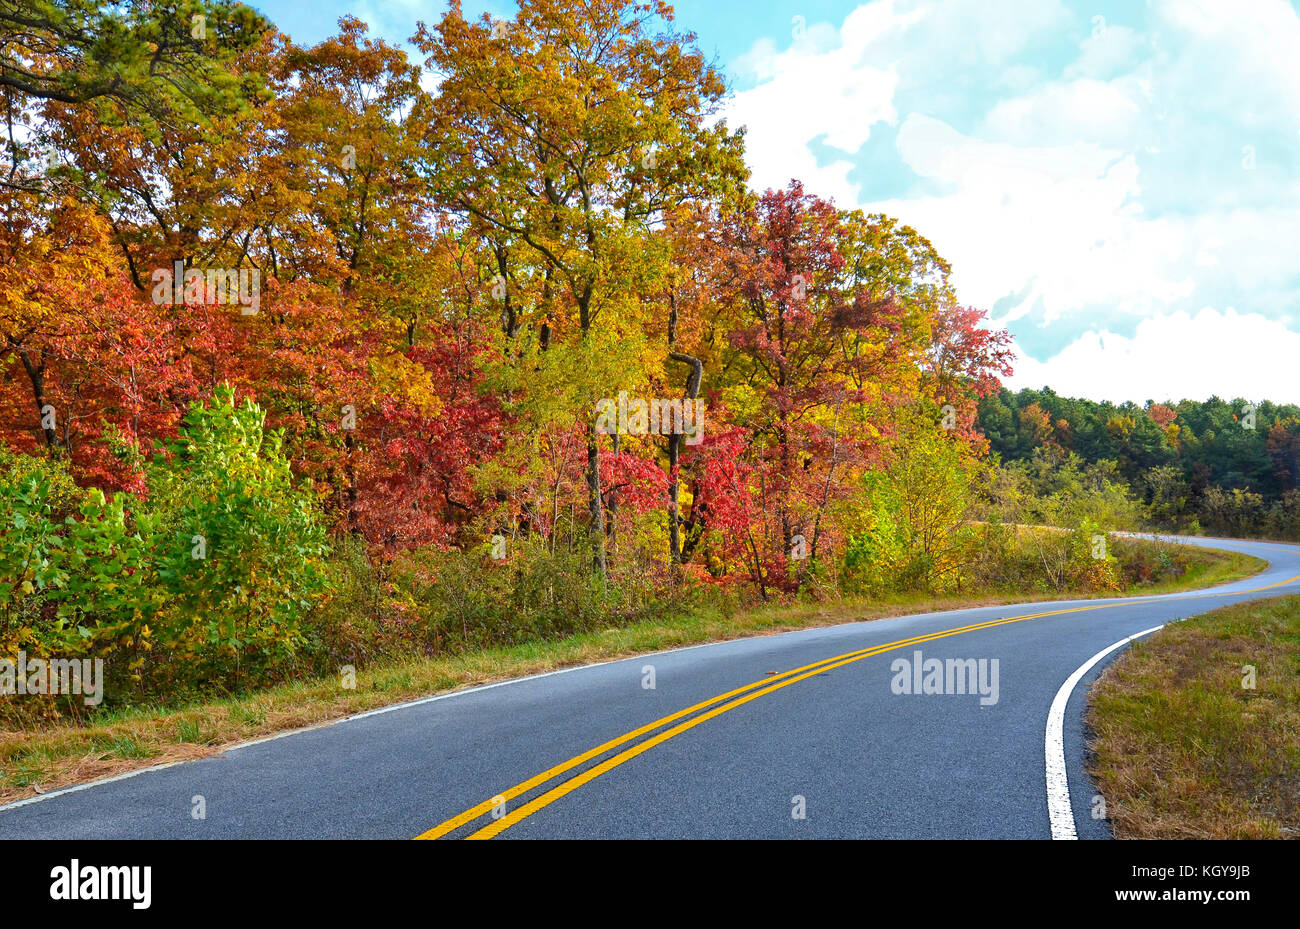 Autumn Colors on curving road Stock Photo